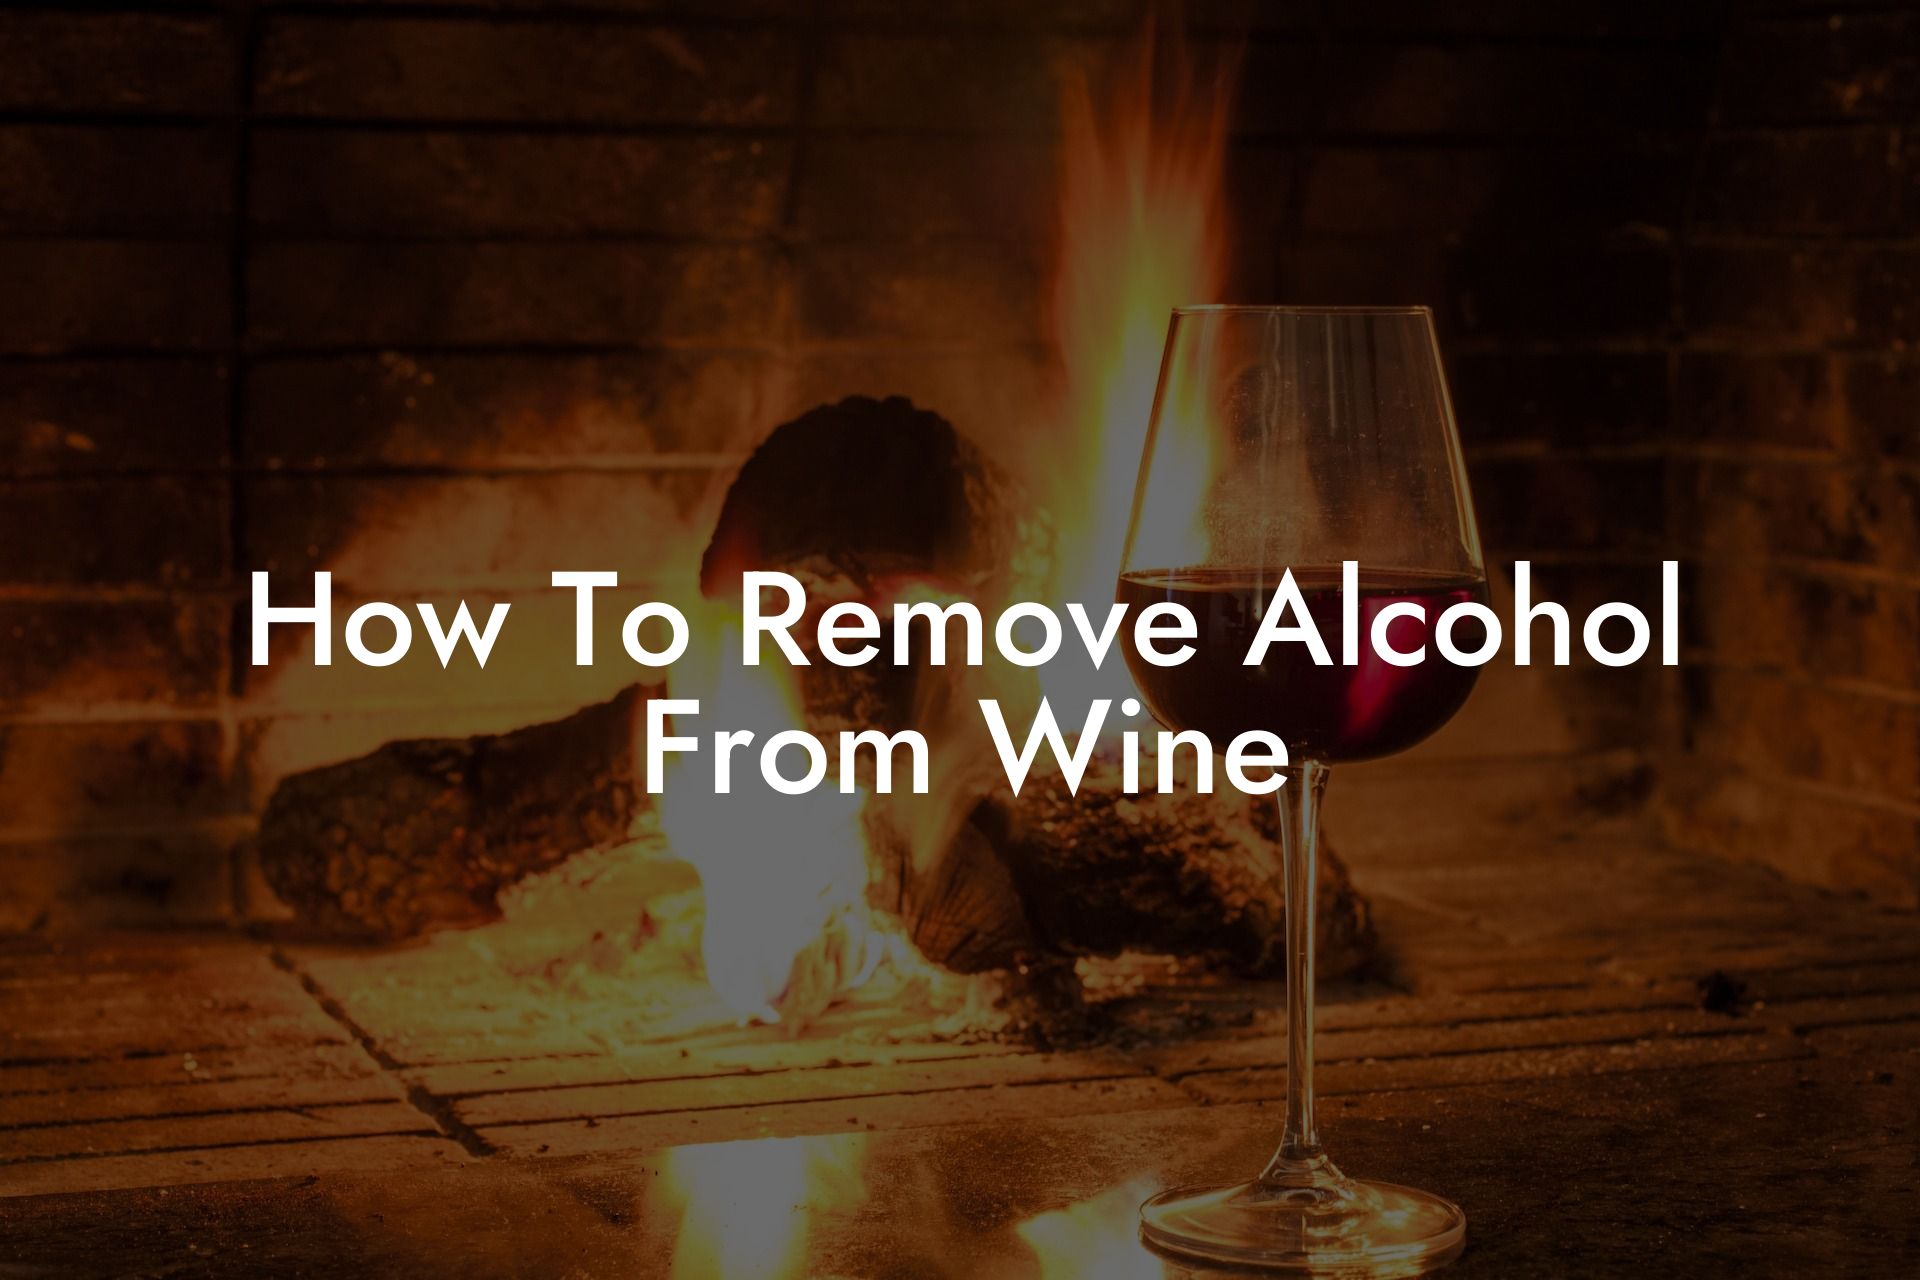 How To Remove Alcohol From Wine